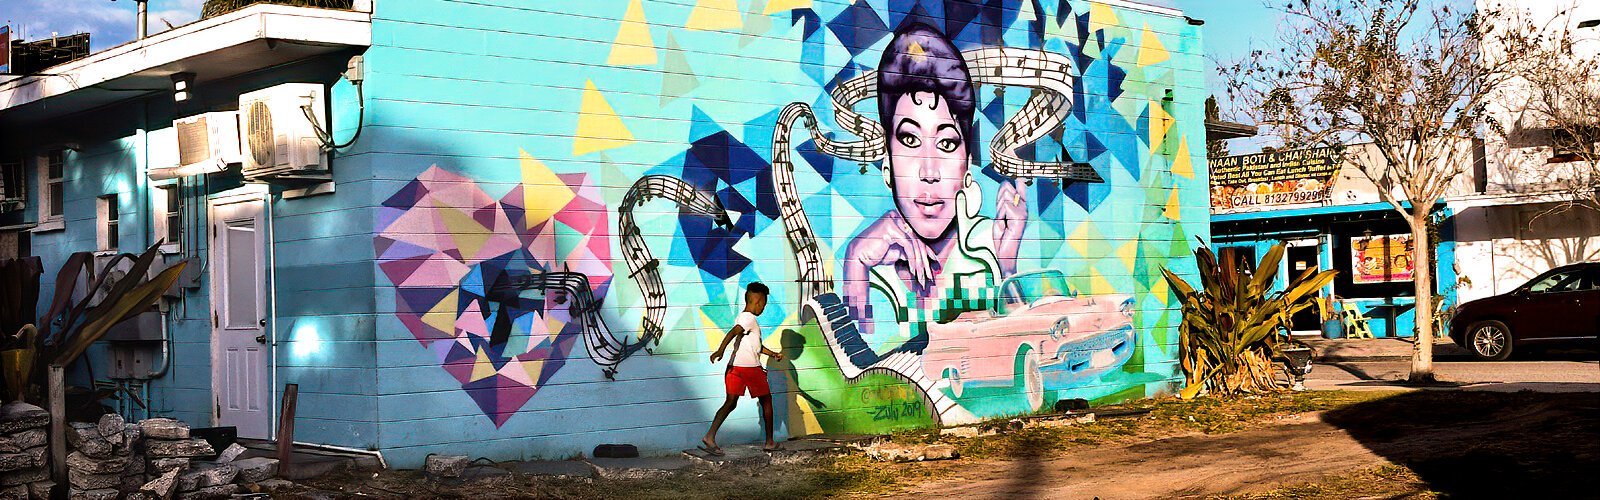 The spirit of creativity spreads through the 22nd Street South corridor, where murals depict famous Black artists and musicians.